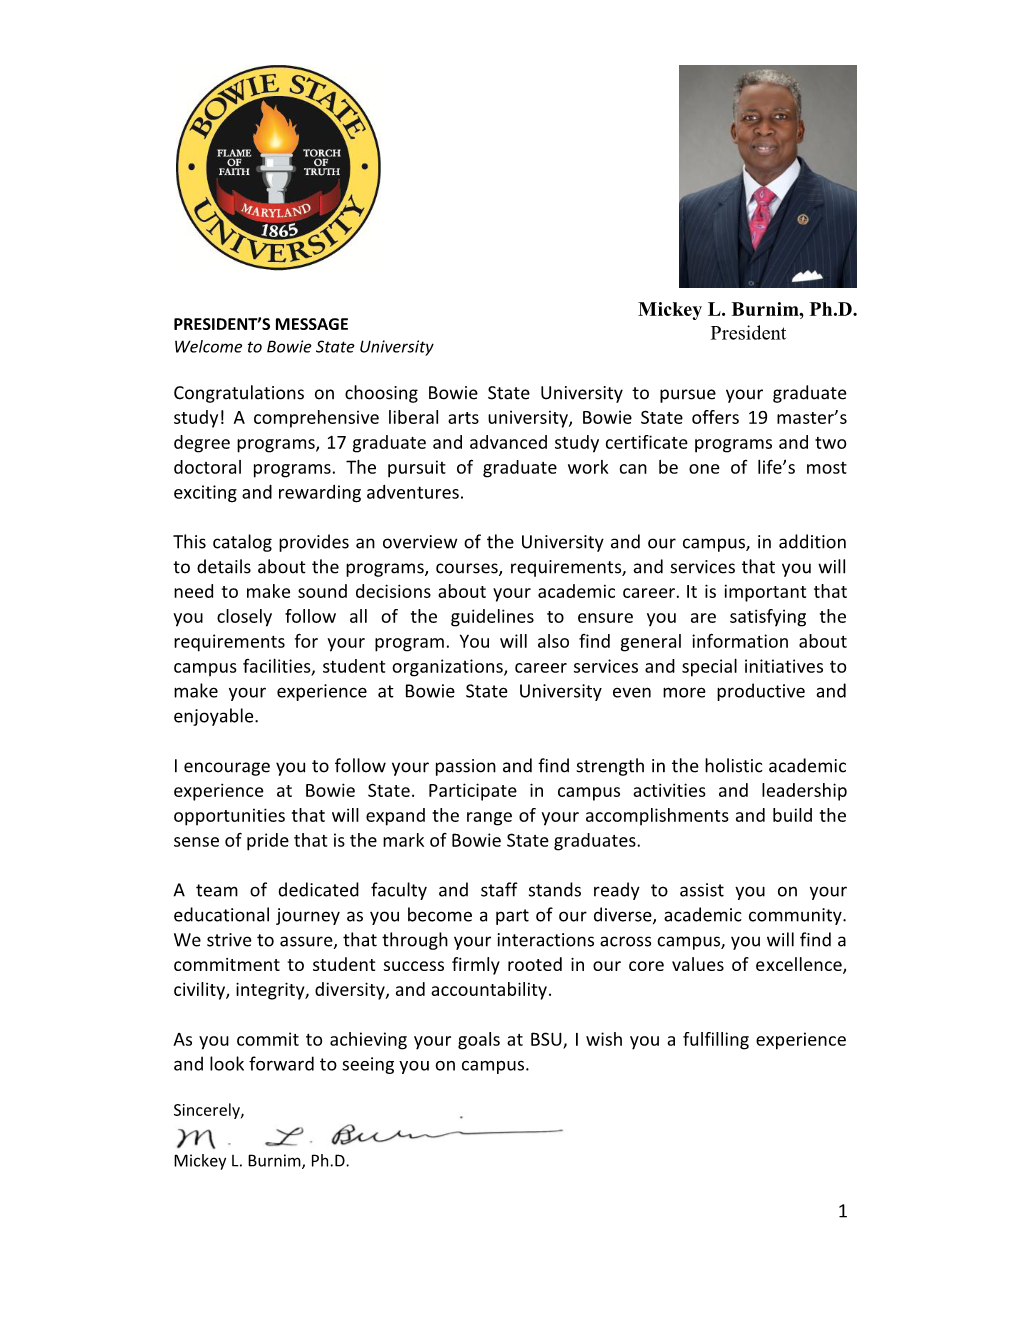 Mickey L. Burnim, Ph.D. PRESIDENT’S MESSAGE President Welcome to Bowie State University